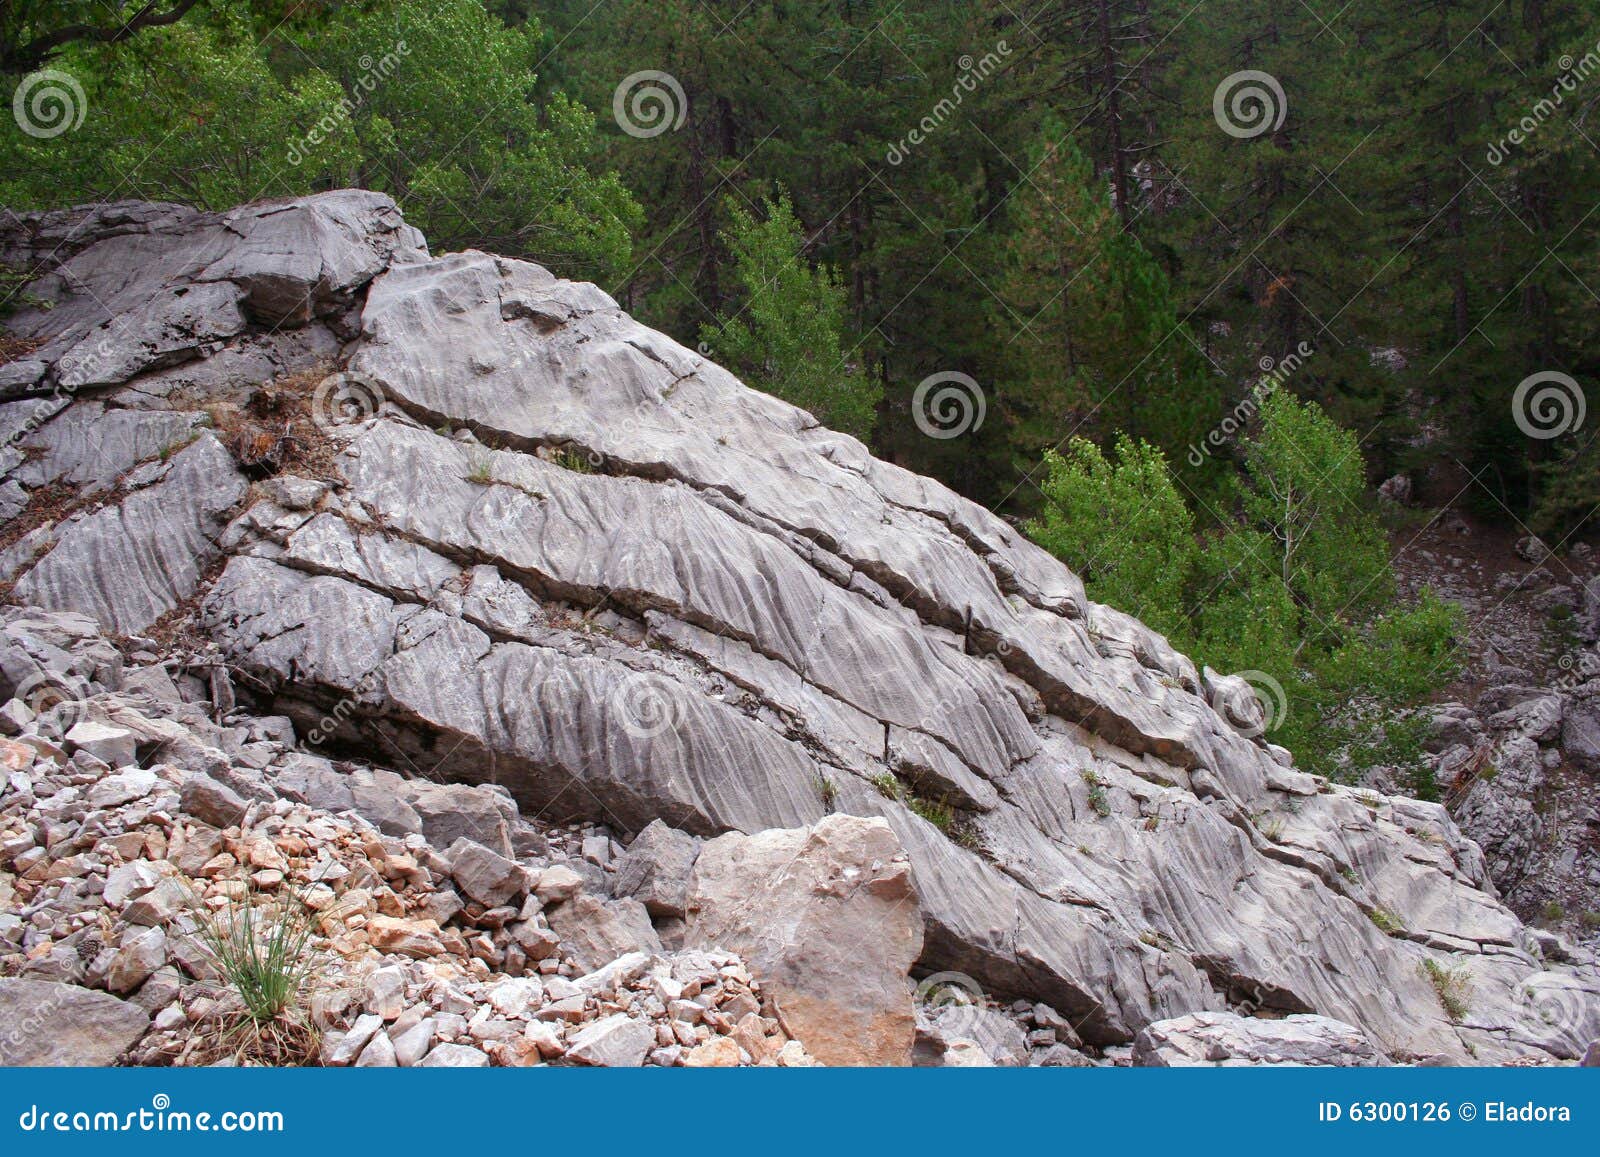 a rock in forest